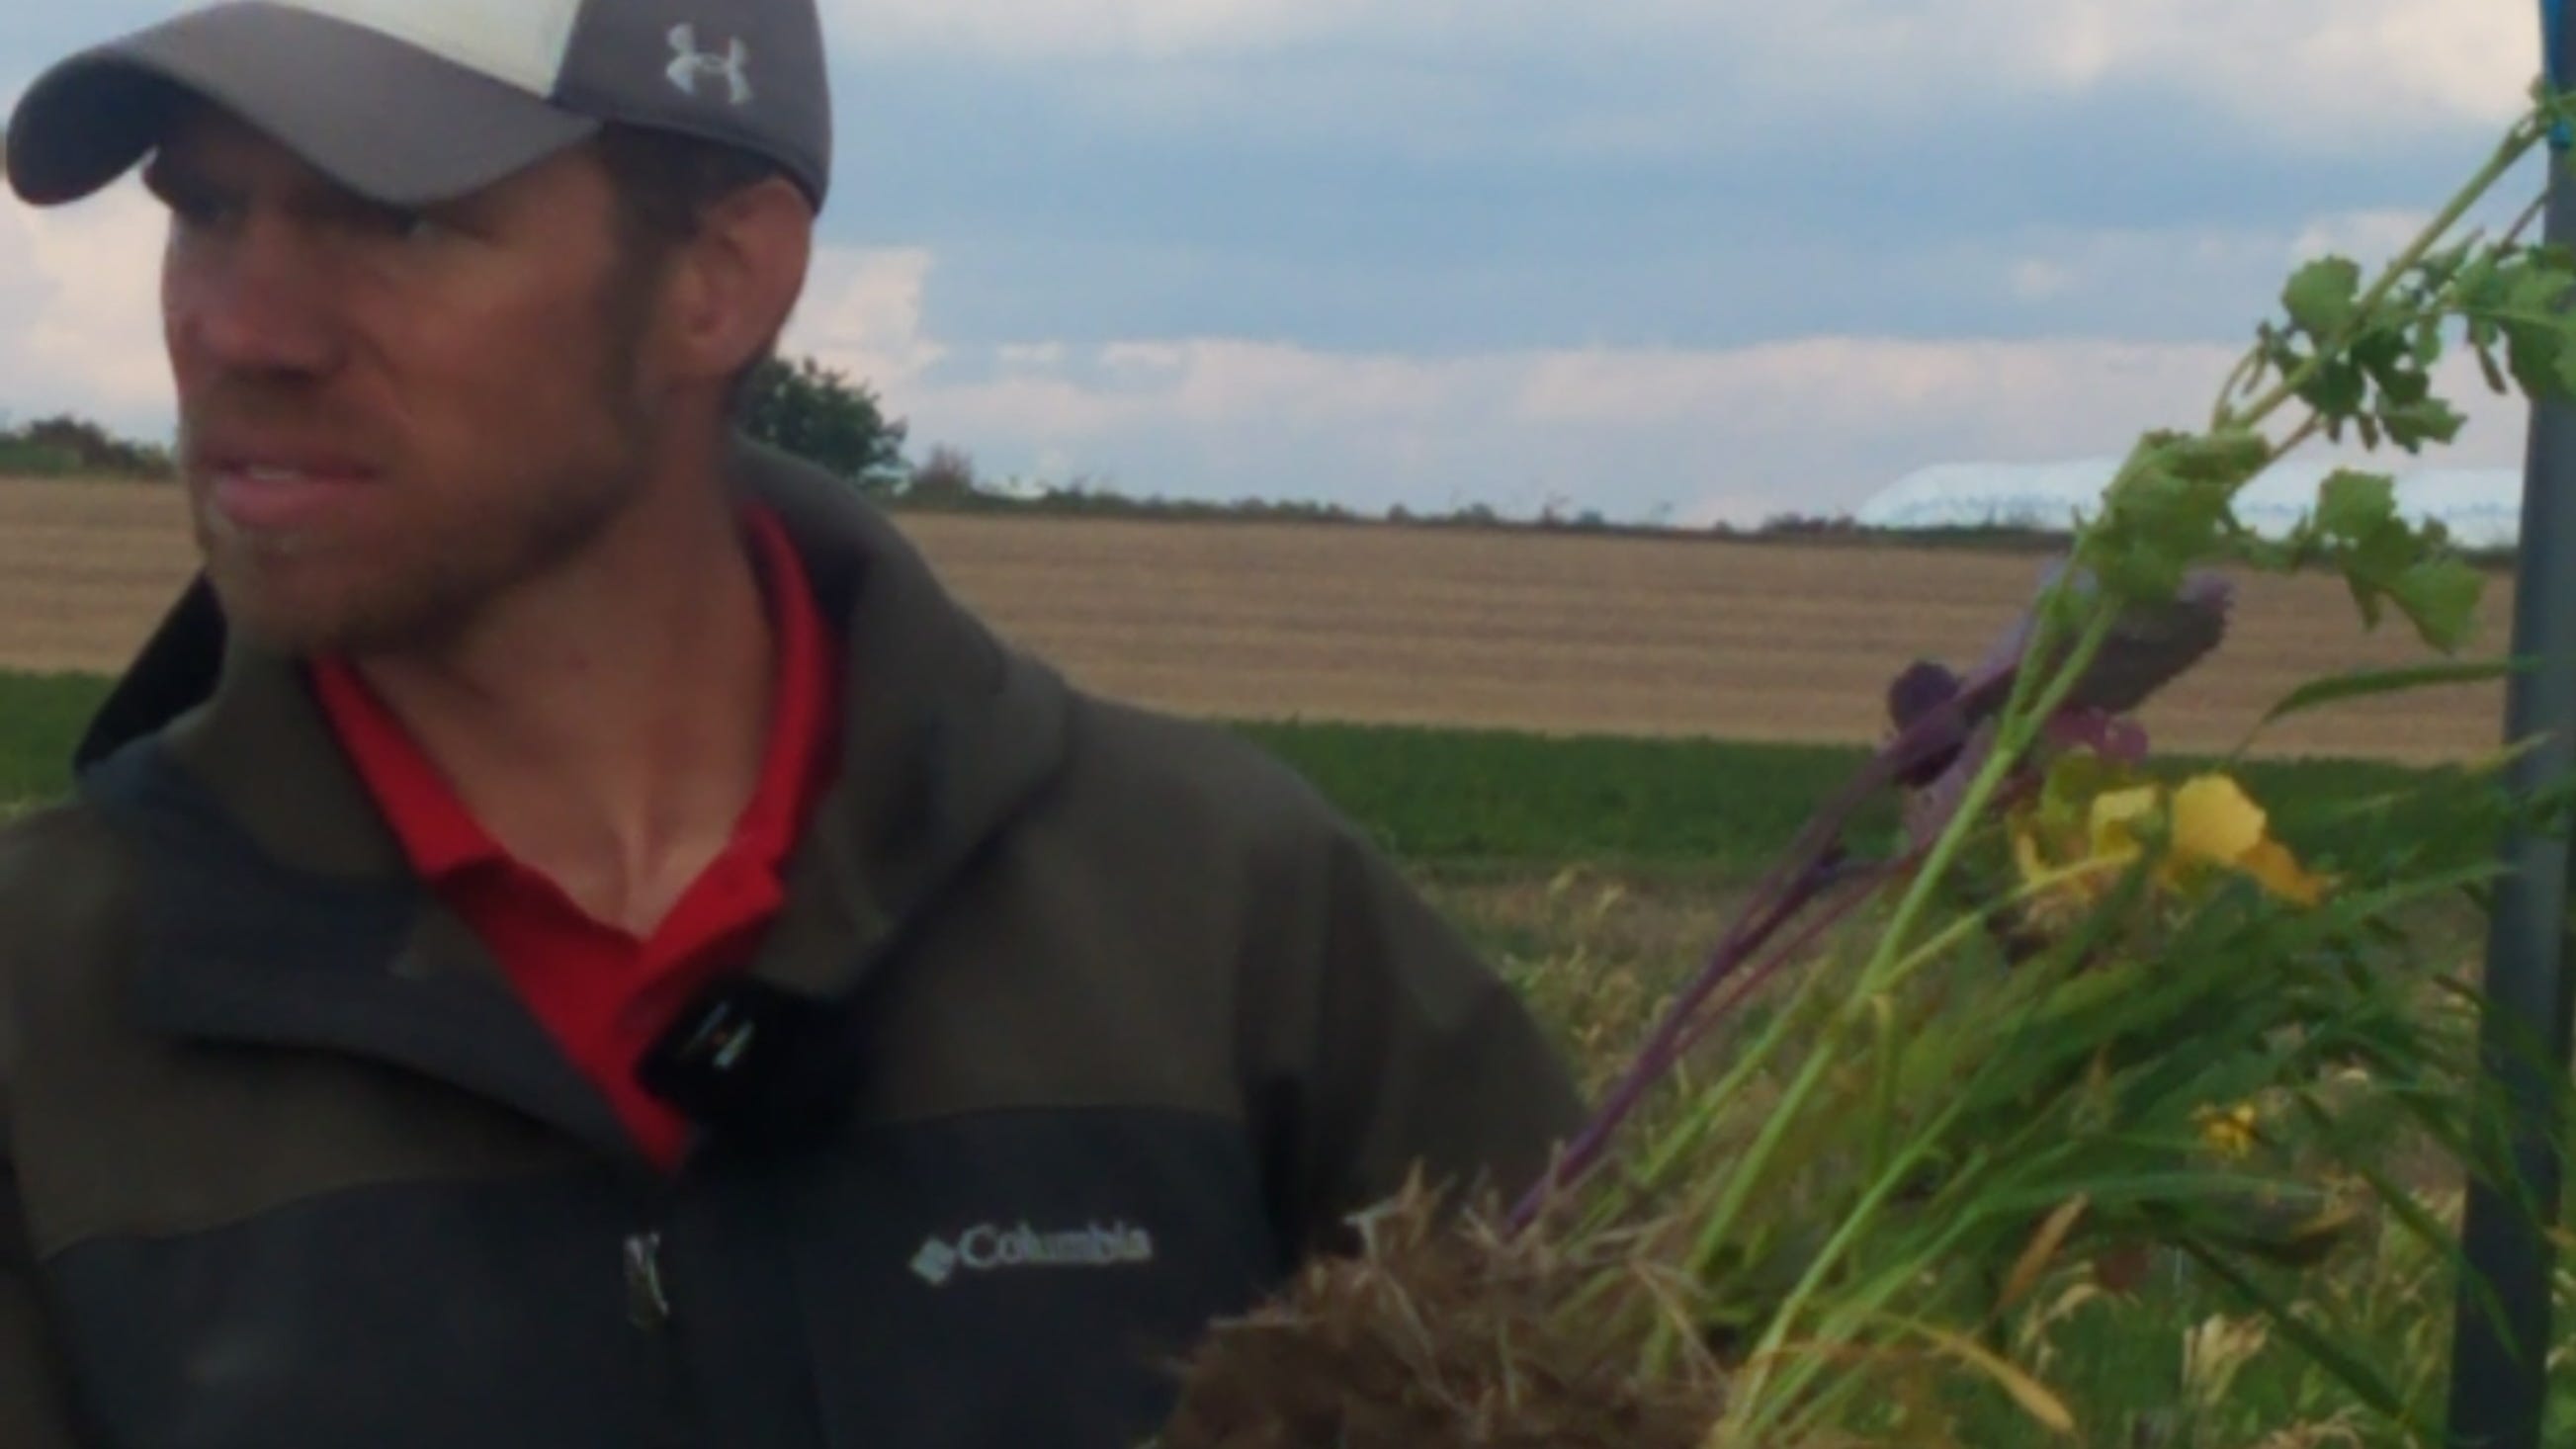 Challenges and benefits of cover crops vary from year to year